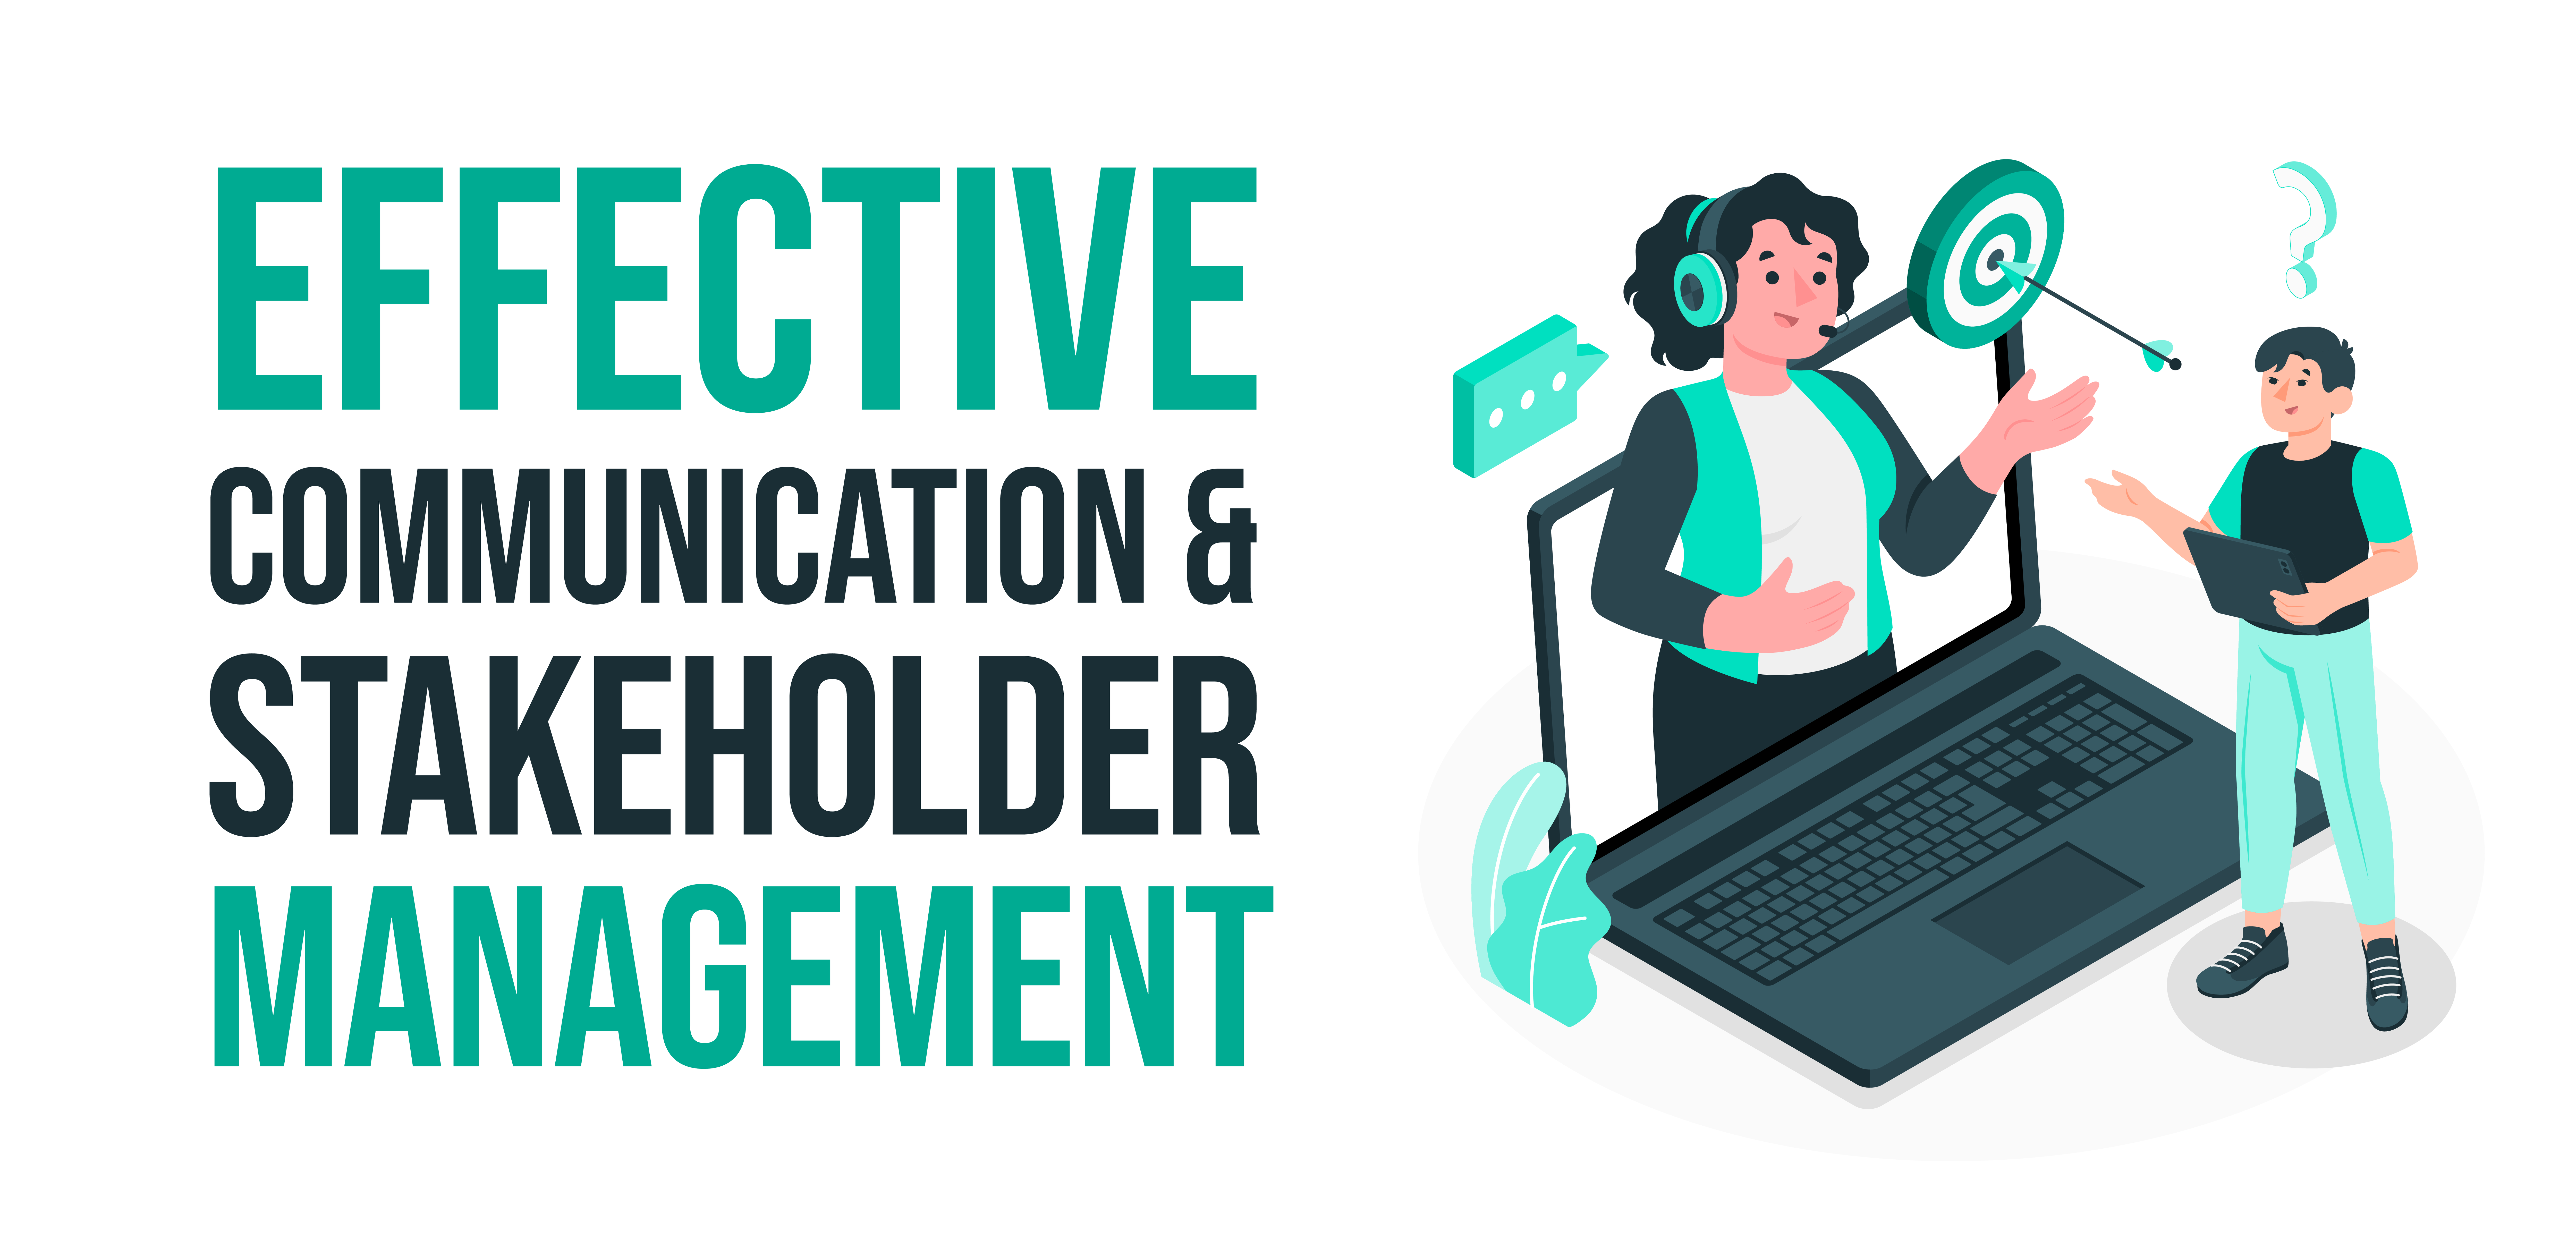 Effective Communication and Stakeholder Management